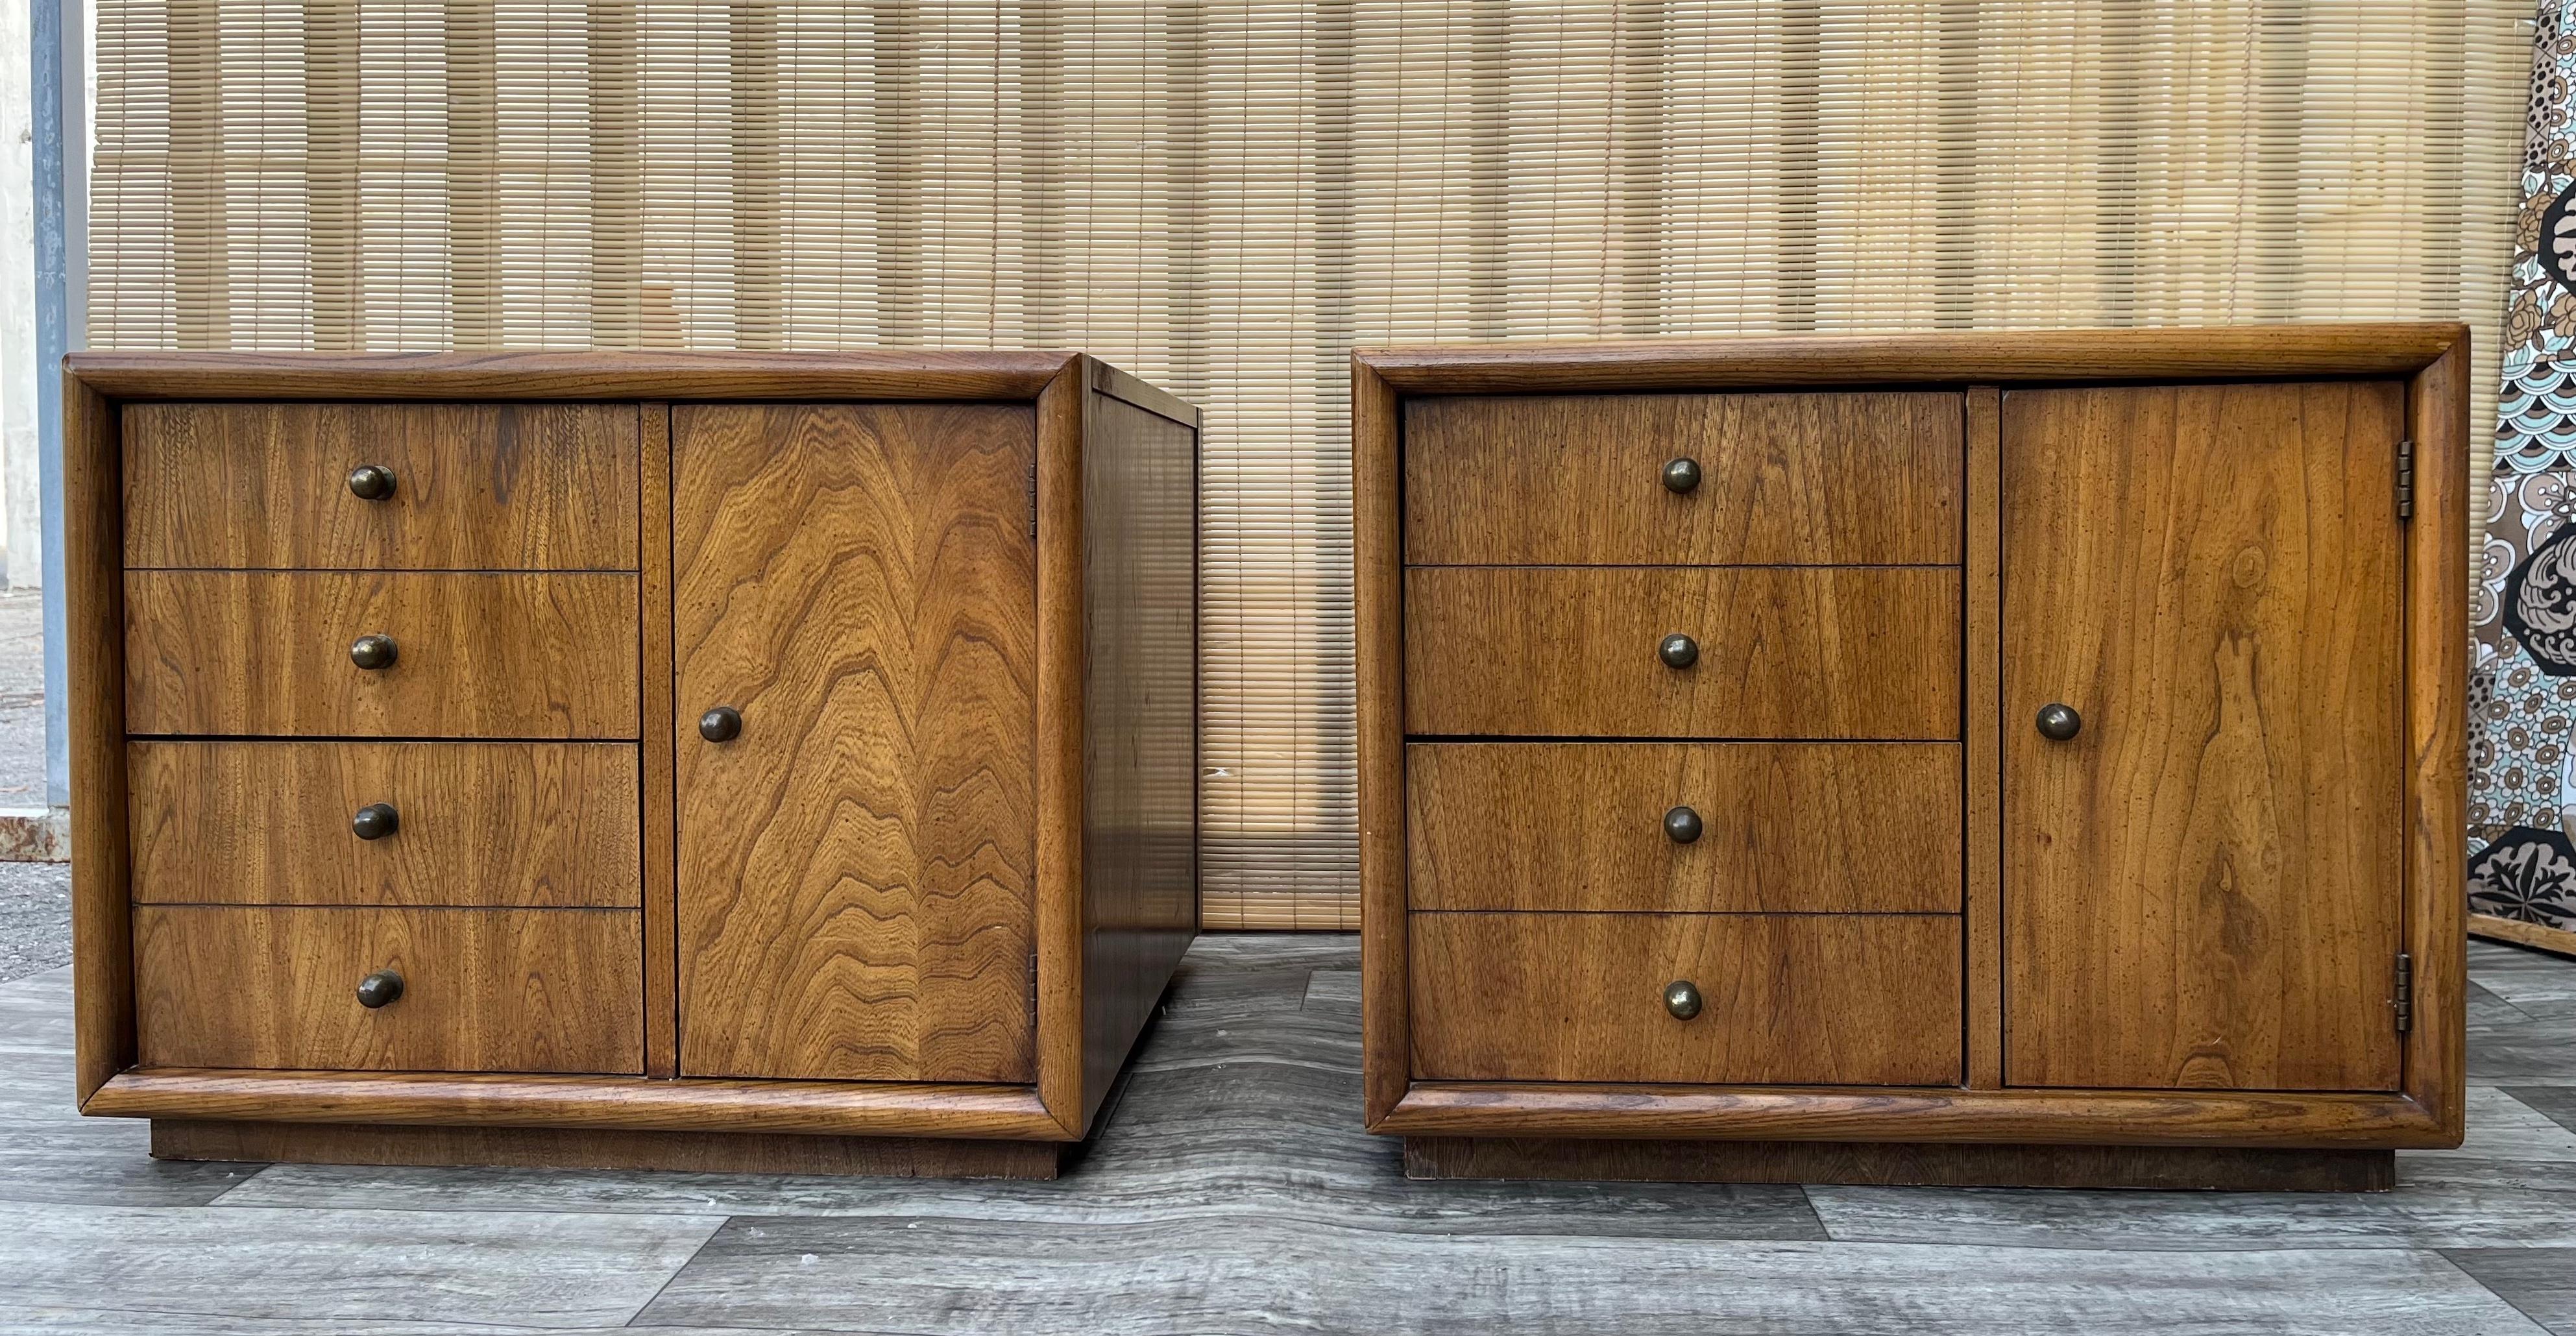 A pair of Vintage Mid-Century Modern Side Tables or Nightstands by Stanley Furniture. Dated 1965
Feature a beautiful walnut wood grain and two drawers and a side cabinet with round brass hardware. 
In excellent original condition with very minor